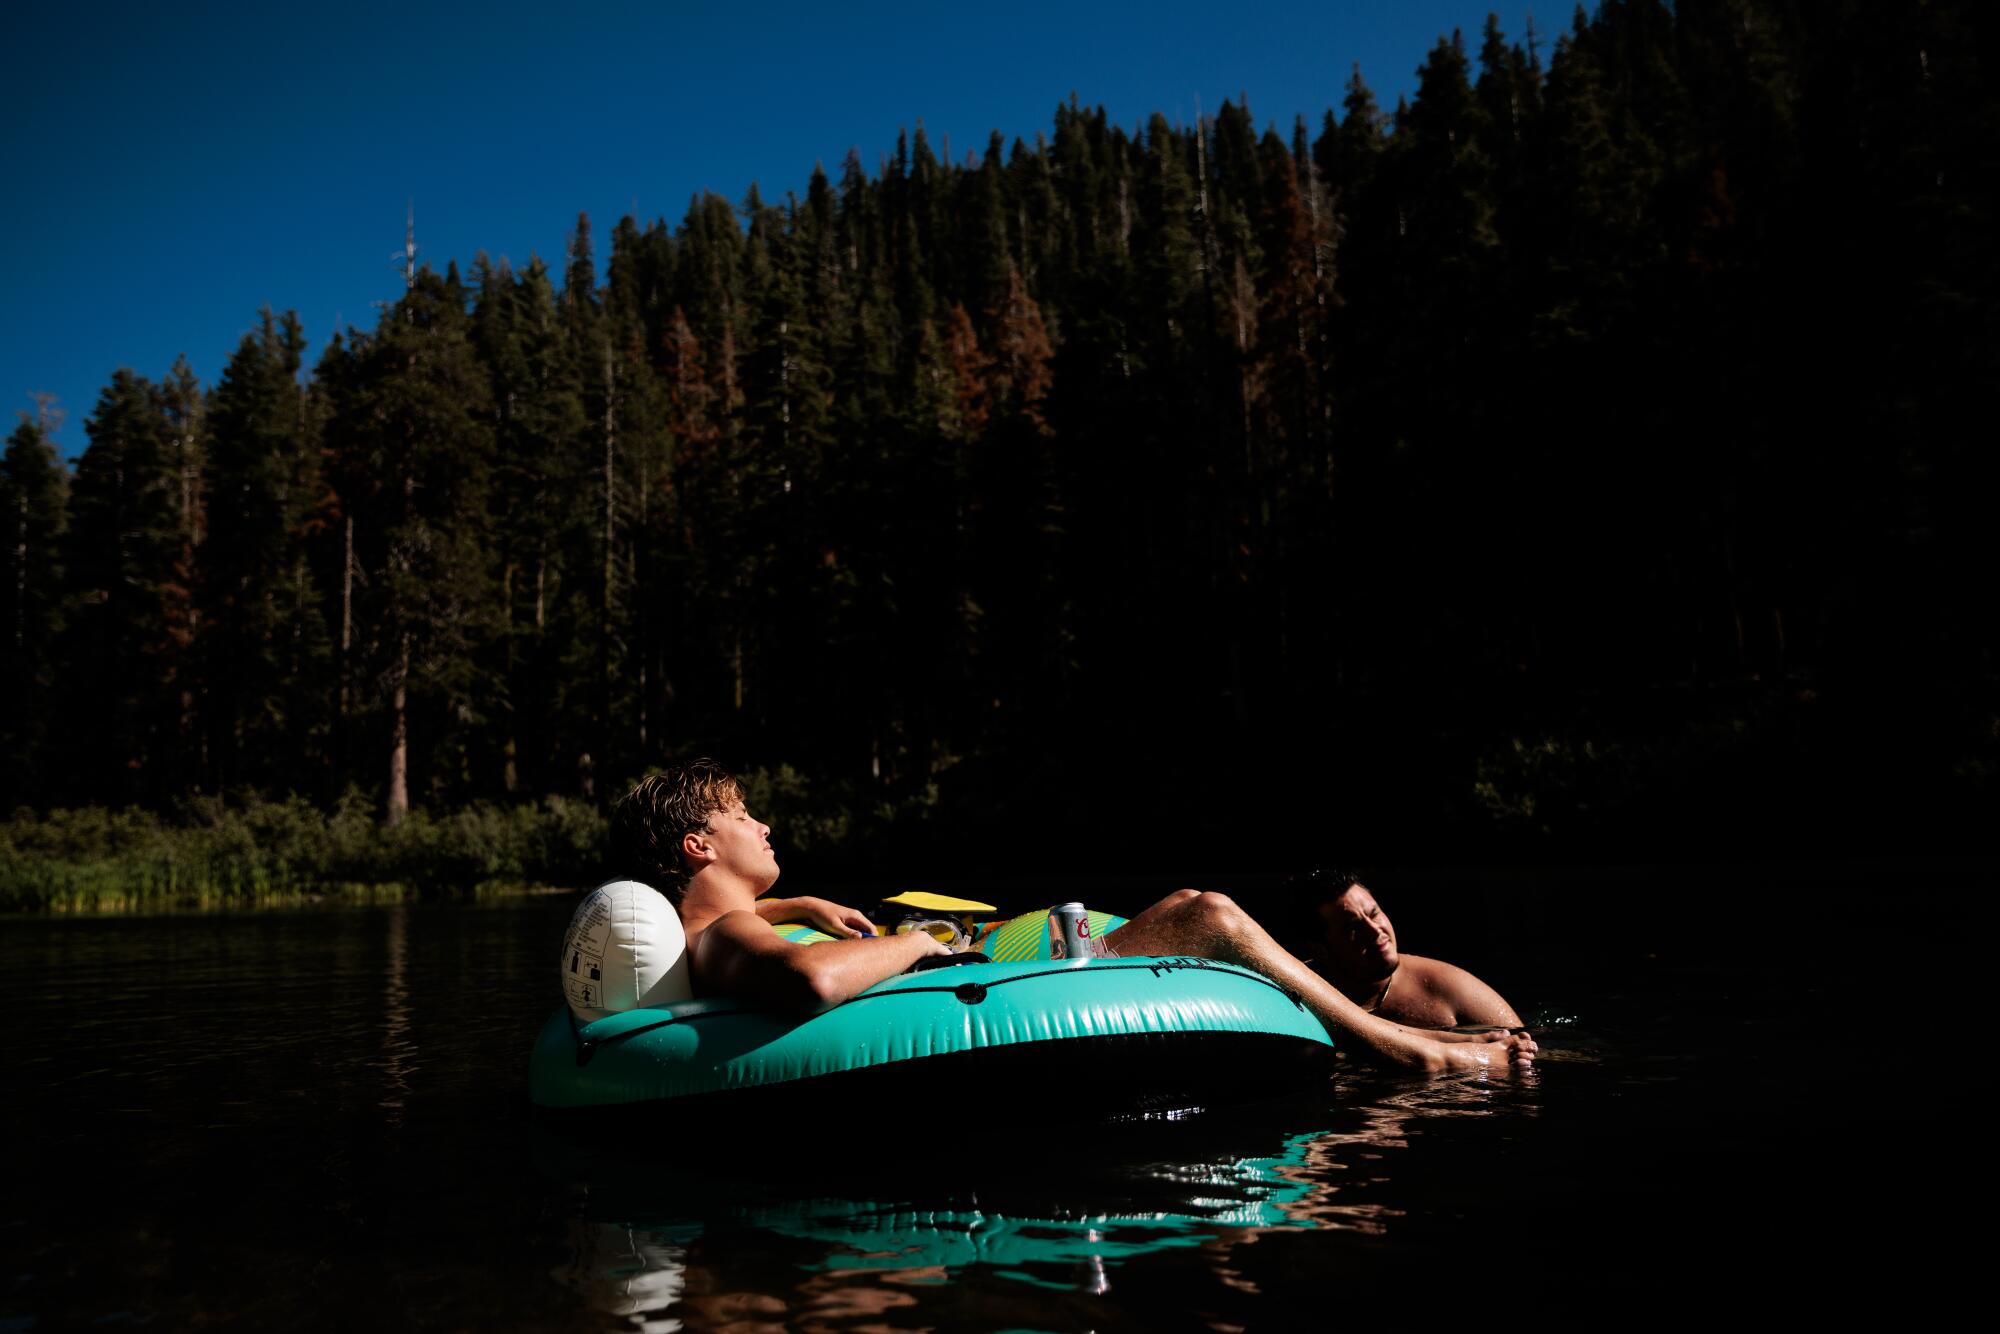 Two people with an inner tube on a lake ringed by conifers.